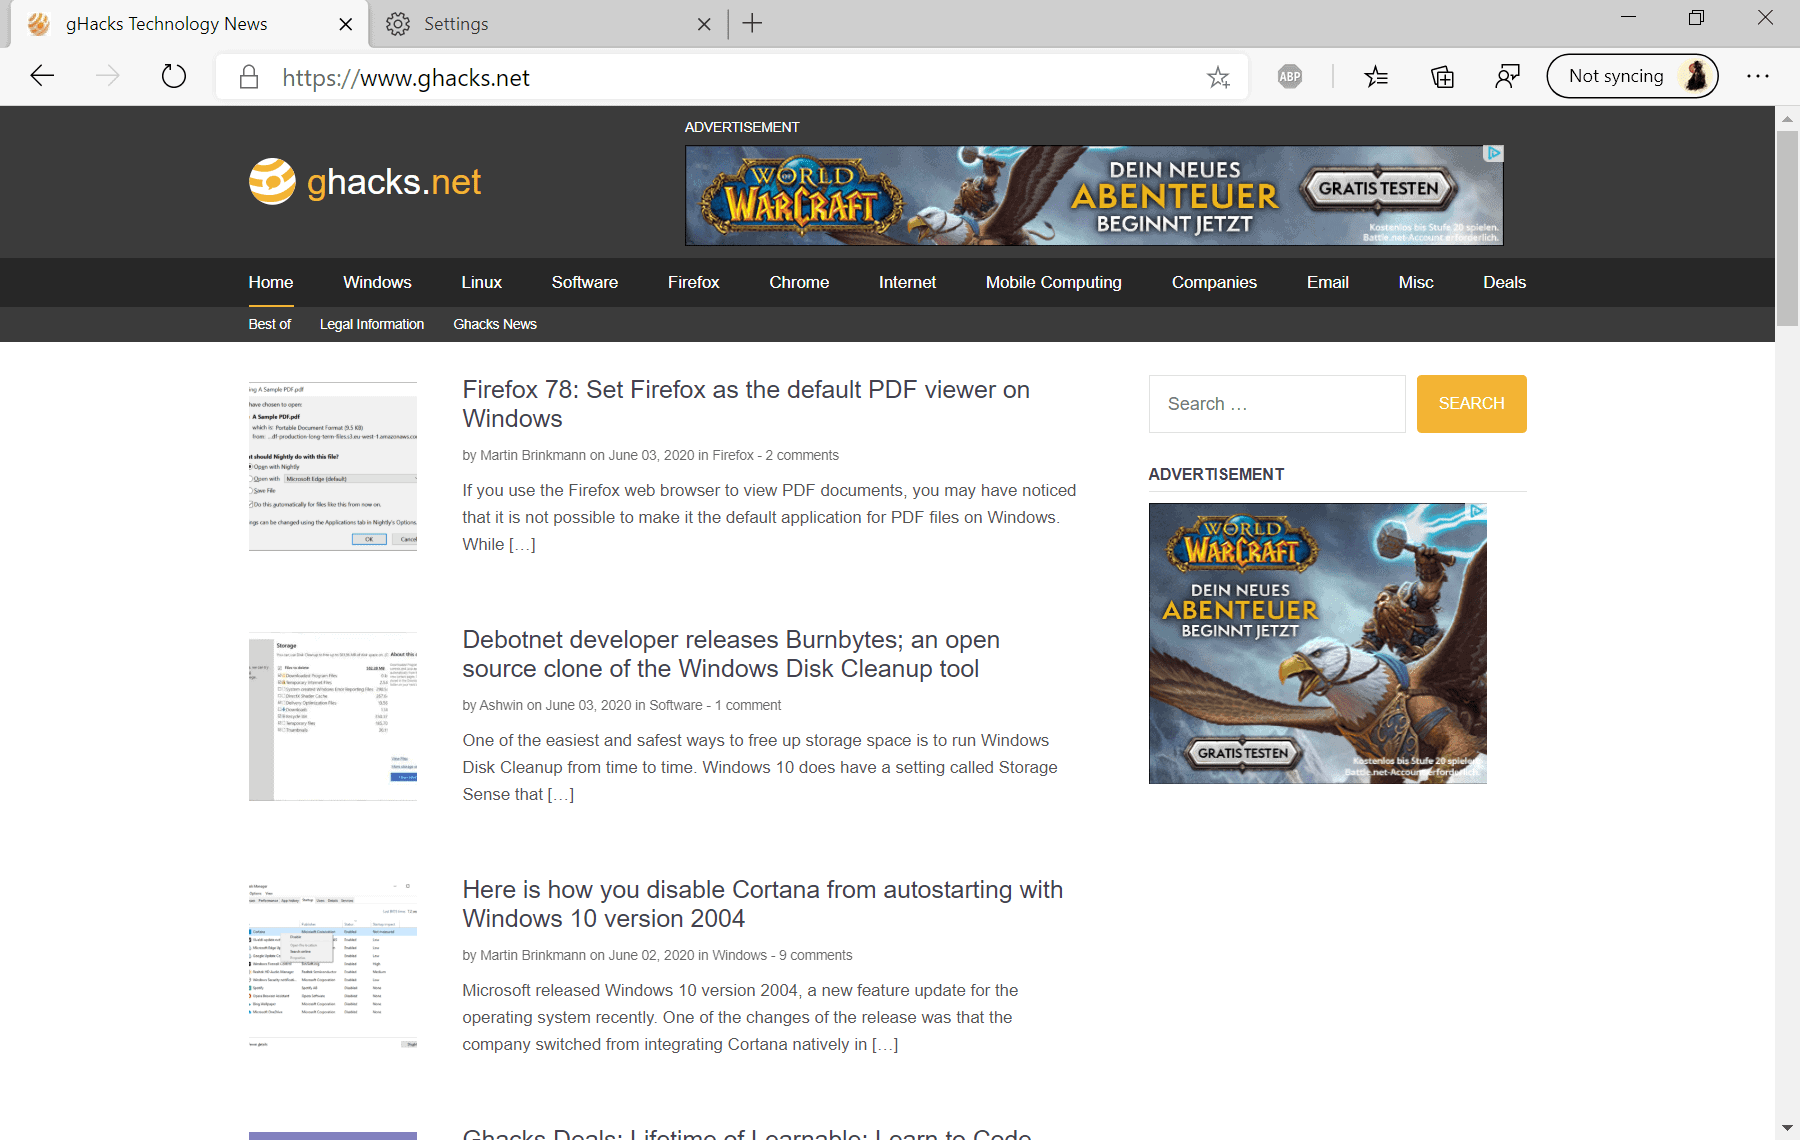 Microsoft Edge Browser Will Soon Get a Games Panel